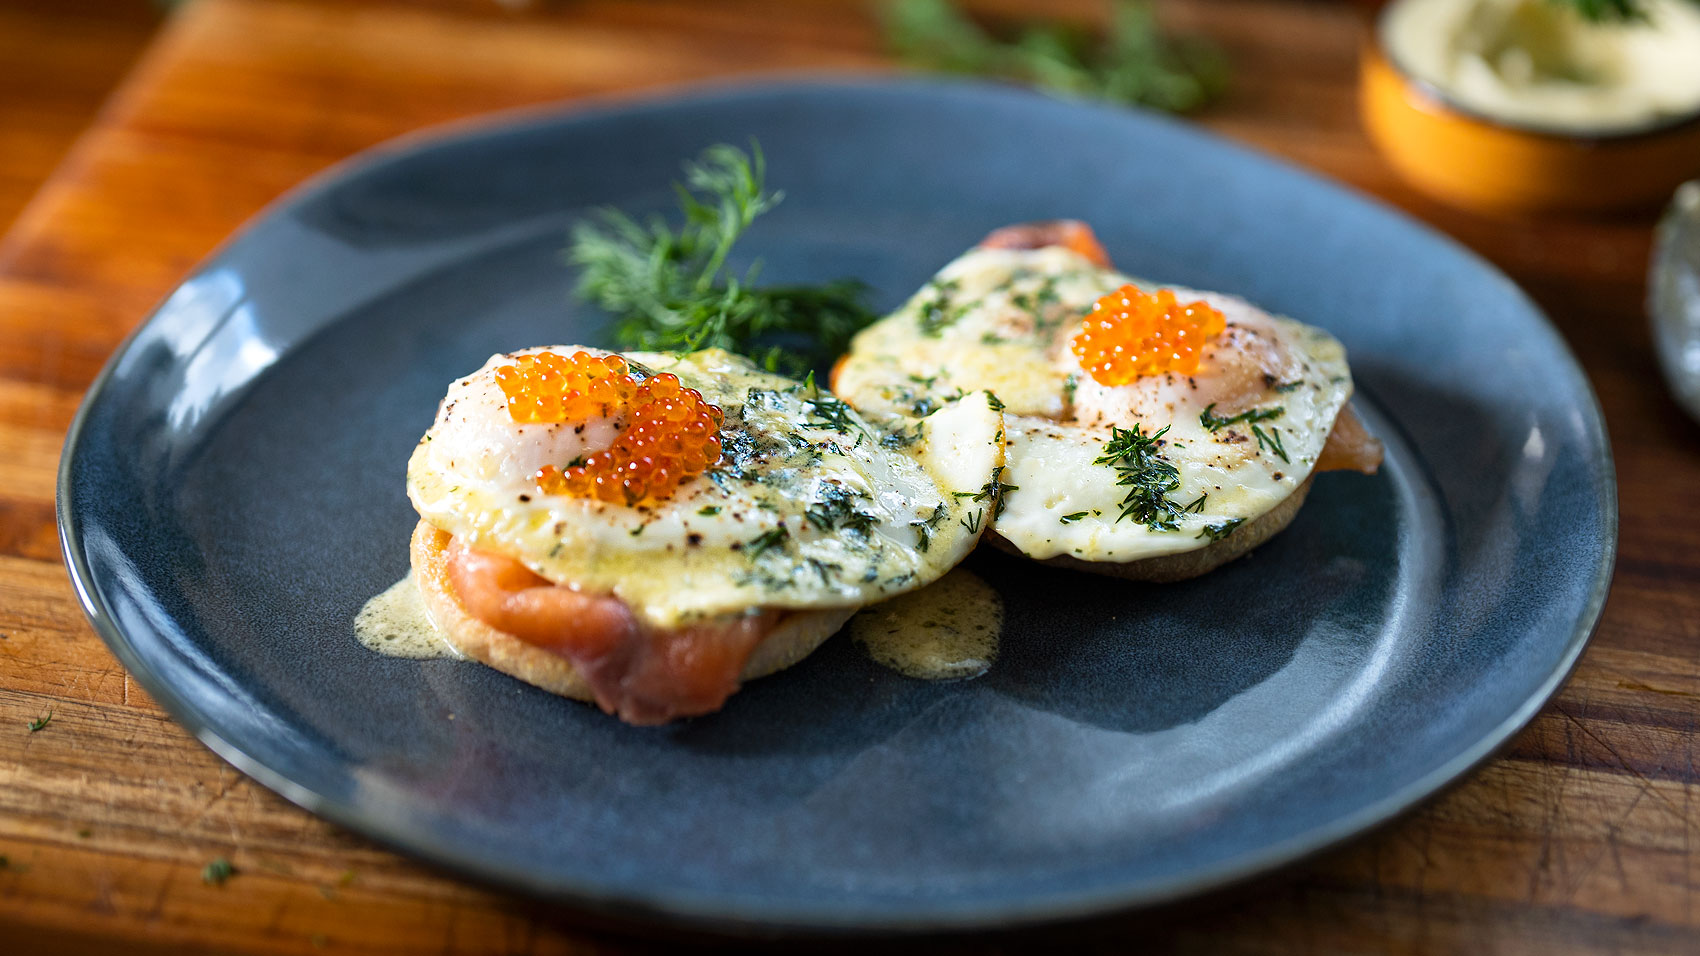 Fried Eggs and Salmon Muffins - Easy Meals with Video Recipes by